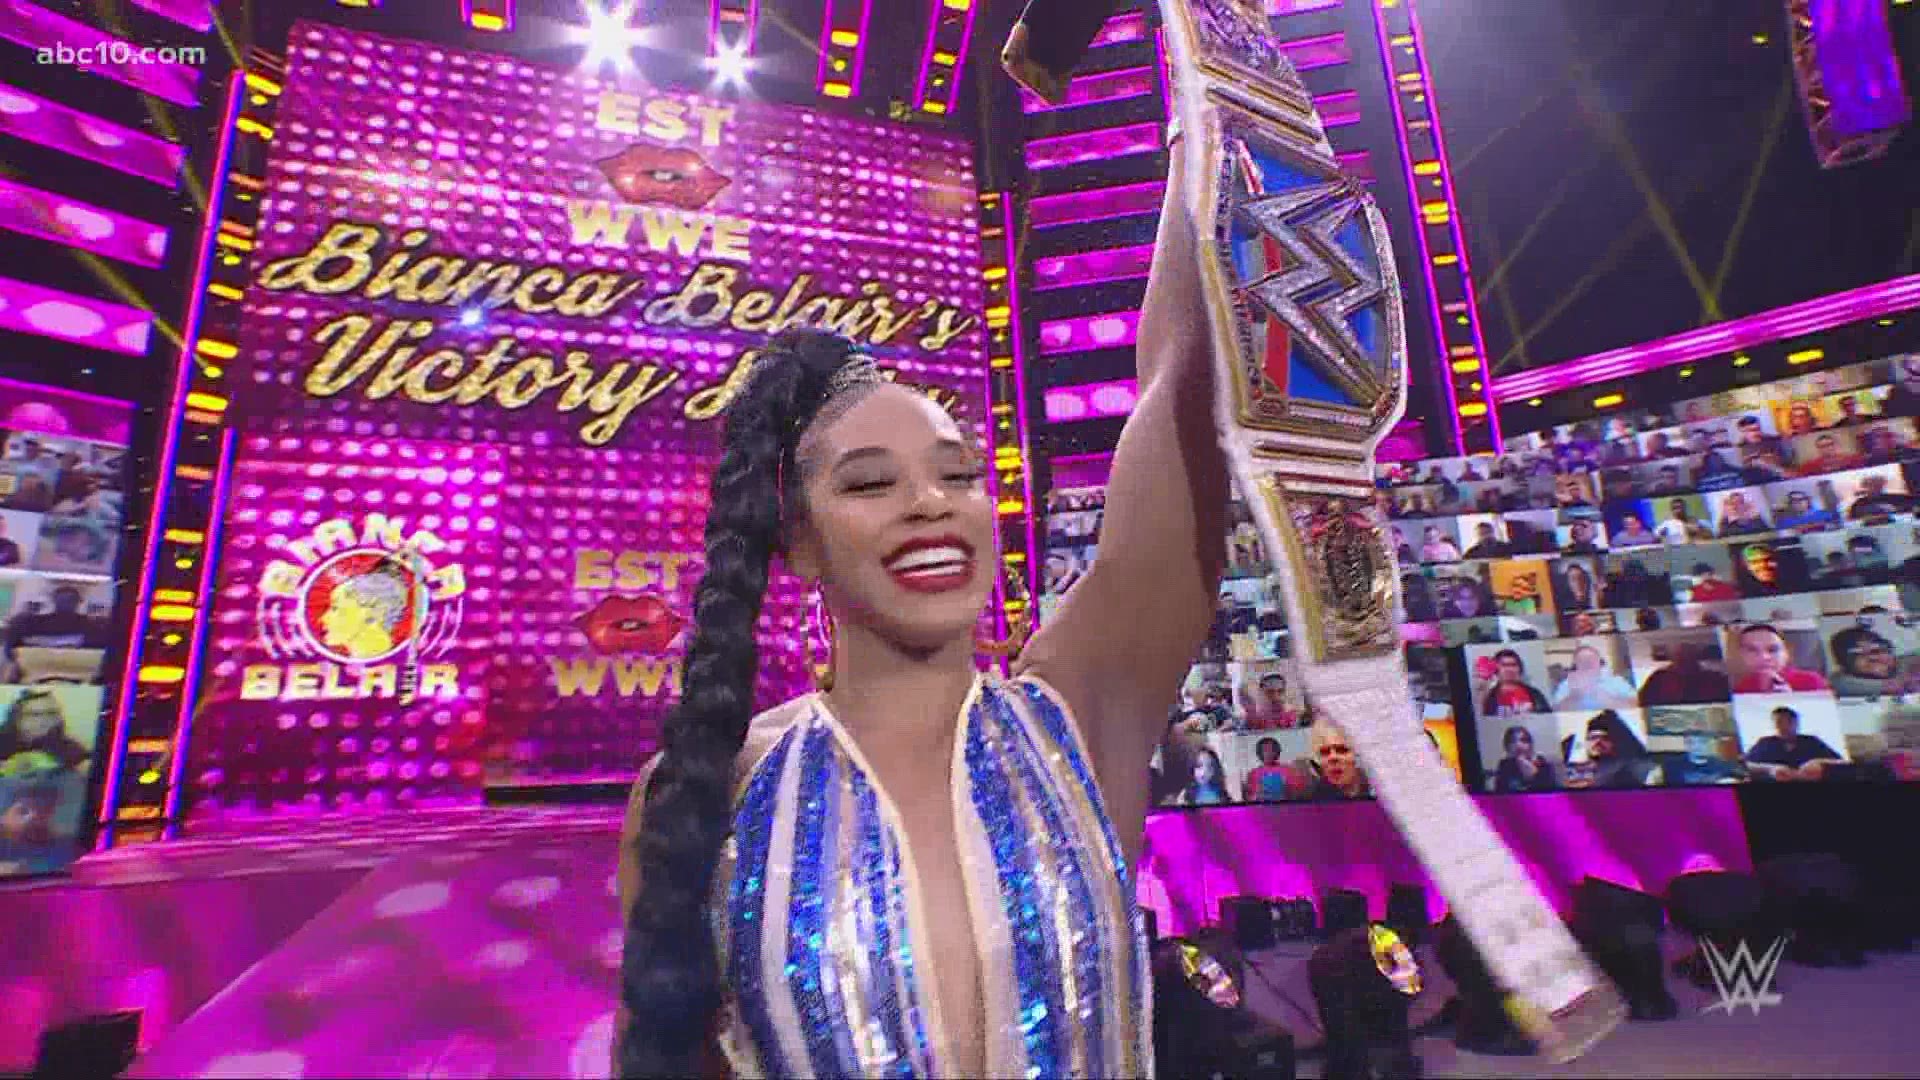 Bianca Belair shares how it feels to have made history as one of the first Black women to main event on WWE's Wrestlemania.